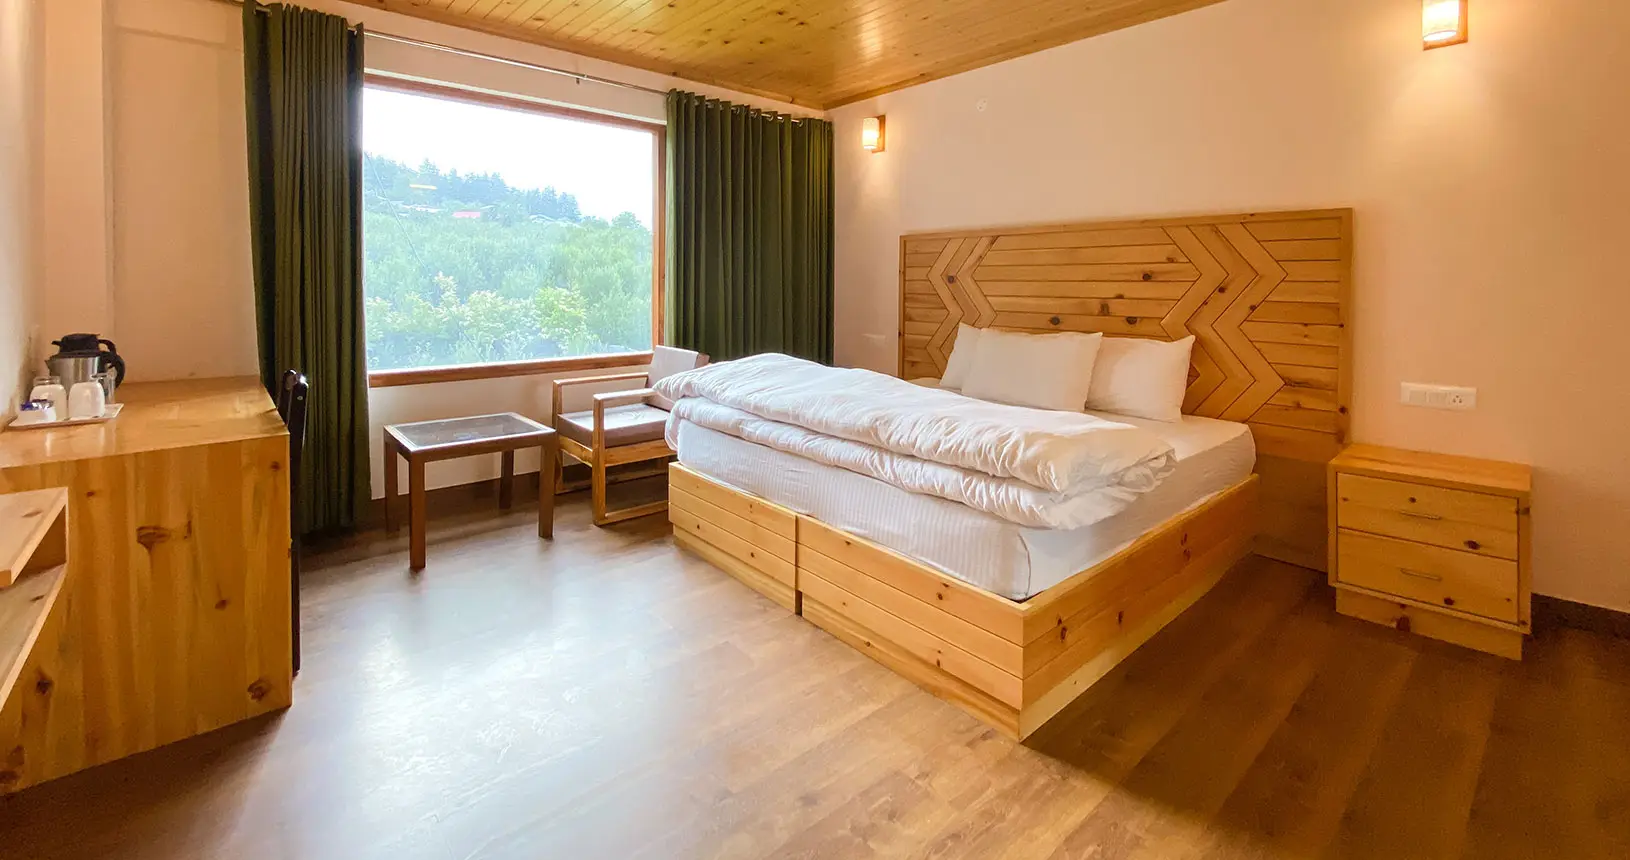 Dining area, bed, and view from deluxe room at Hotel Batseri, Sangla.